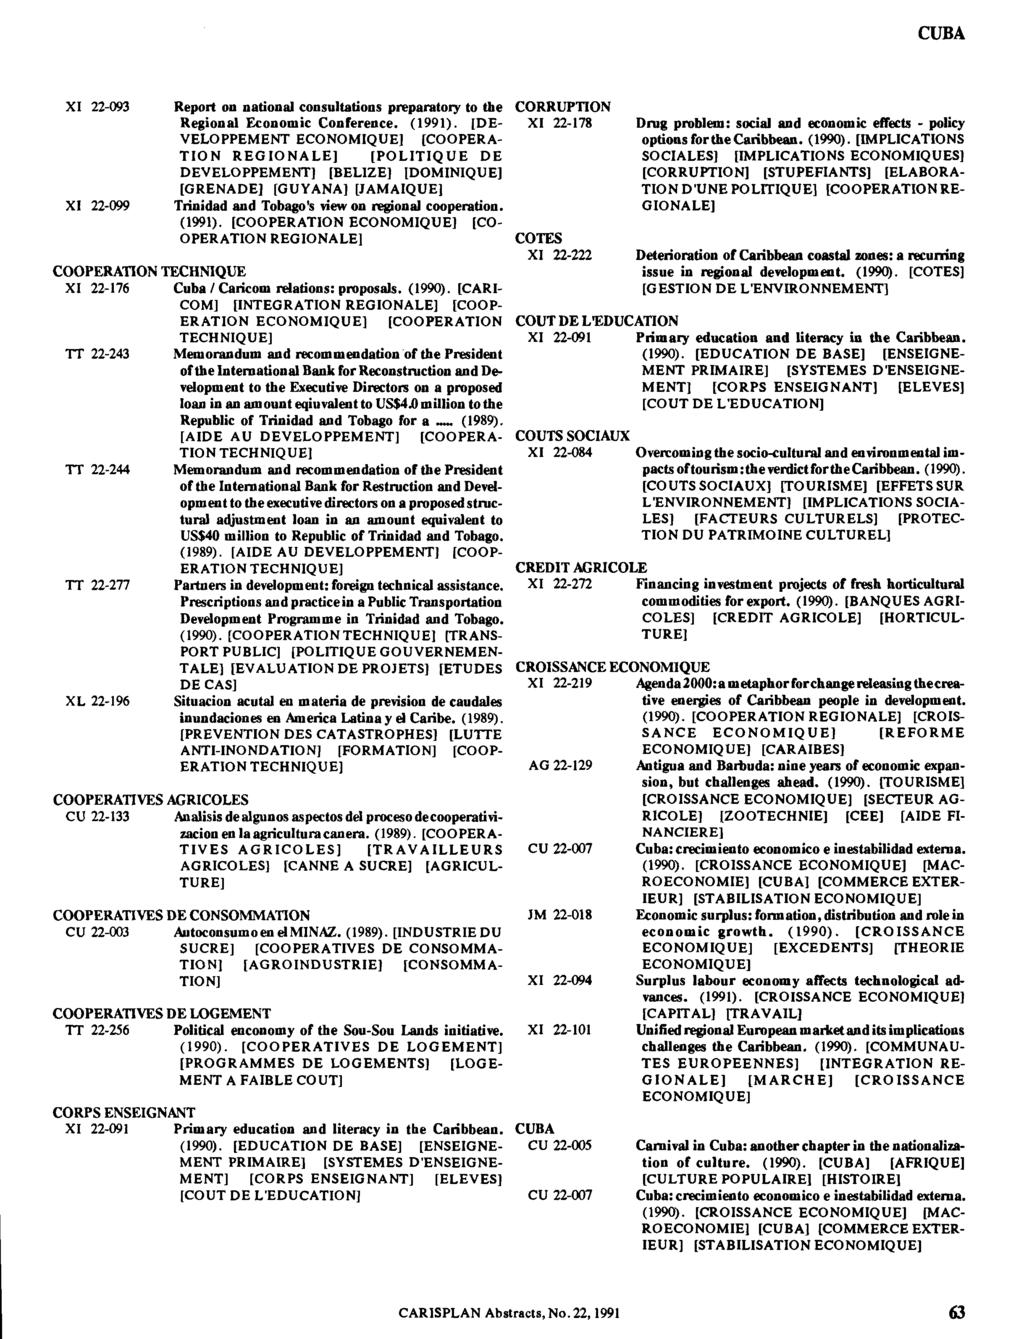 CUBA XI 22-093 XI 22-099 Report on national consultations preparatory to the Regional Economic Conference. (1991).